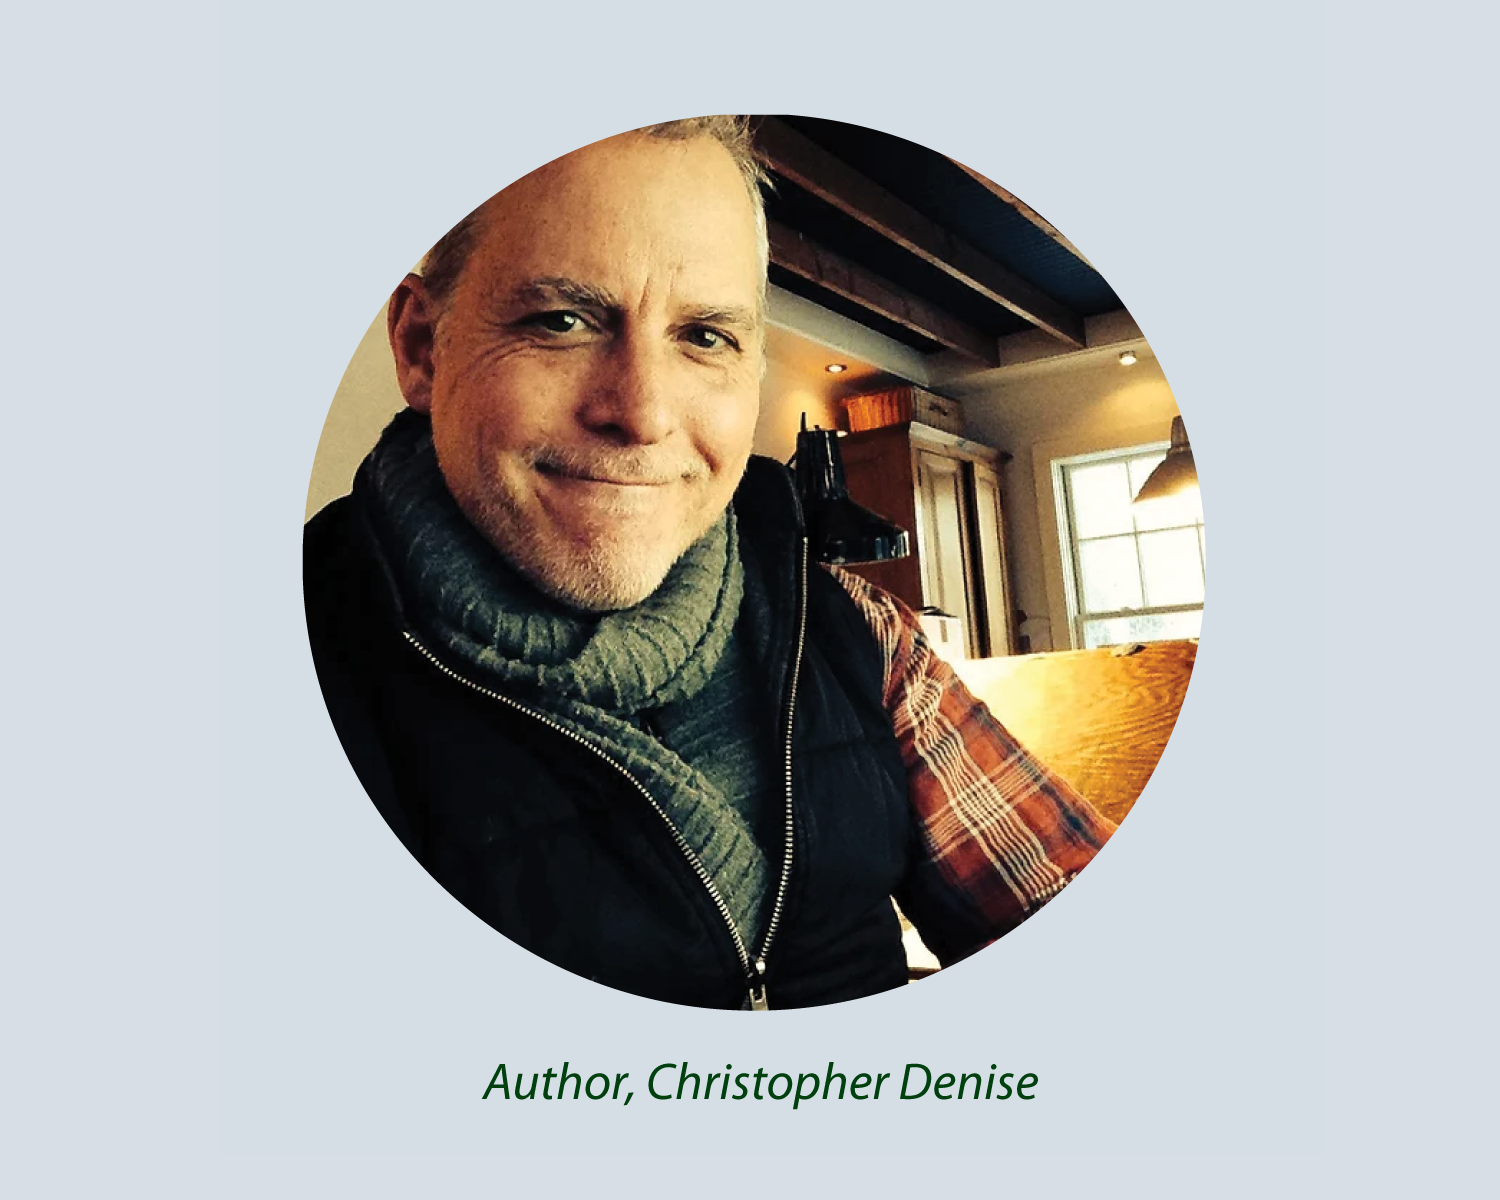 Christopher Denise, author of the Knight Owl Book.